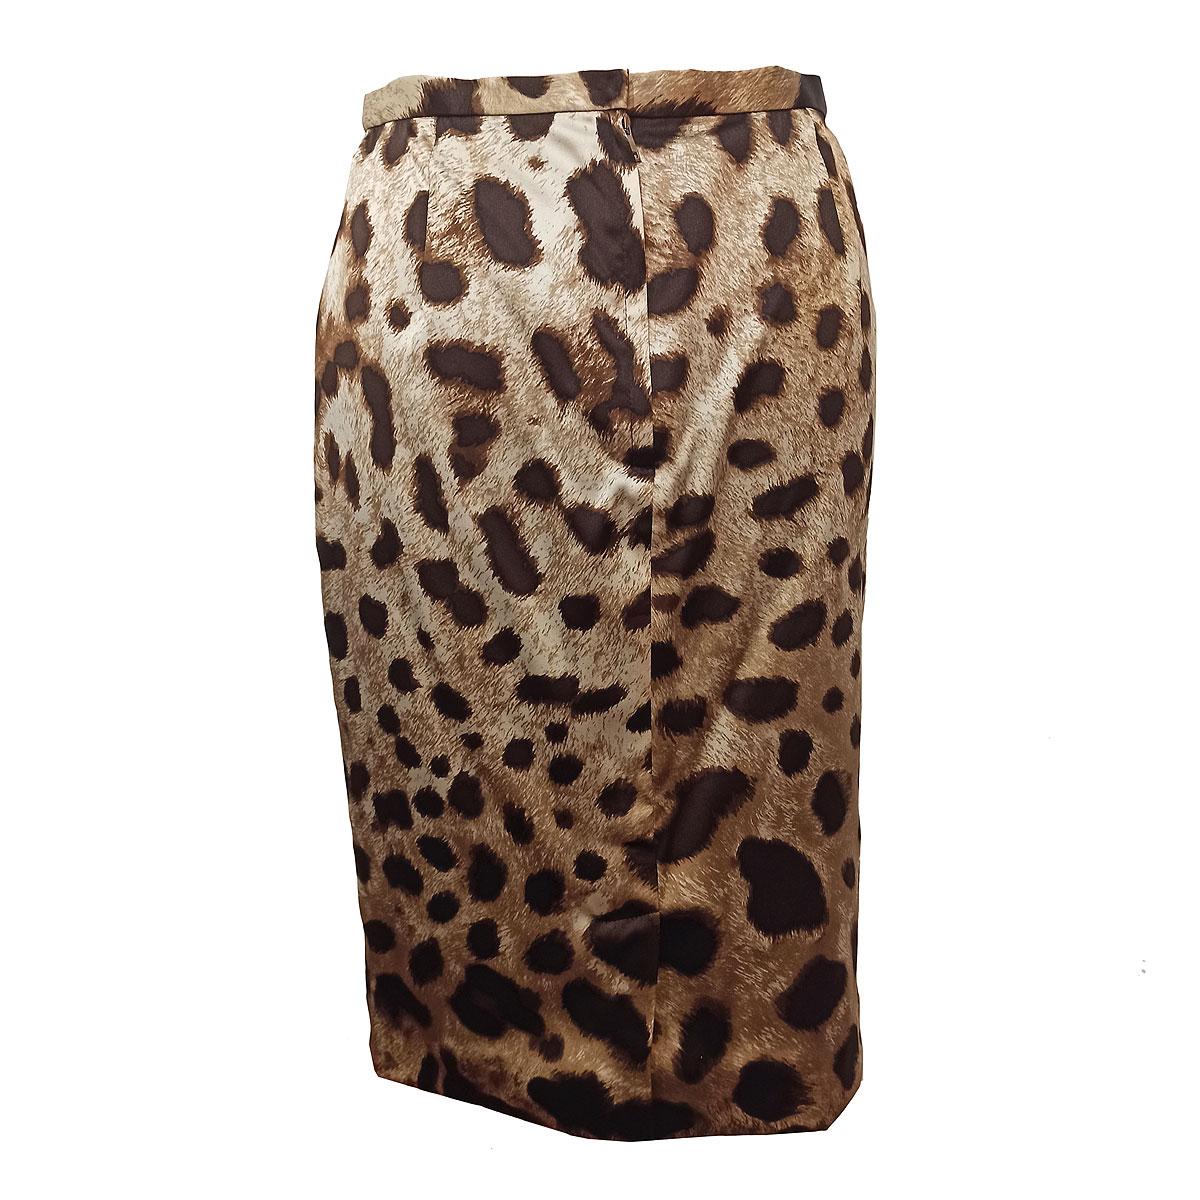 Stunning Dolce & Gabbana printed skirt
Silk (93%) Elastan (7%)
Animalier fancy
Total length cm 59 (23,22 inches)
Waist cm 35 (13,77 inches)
Worldwide express shipping included in the price !